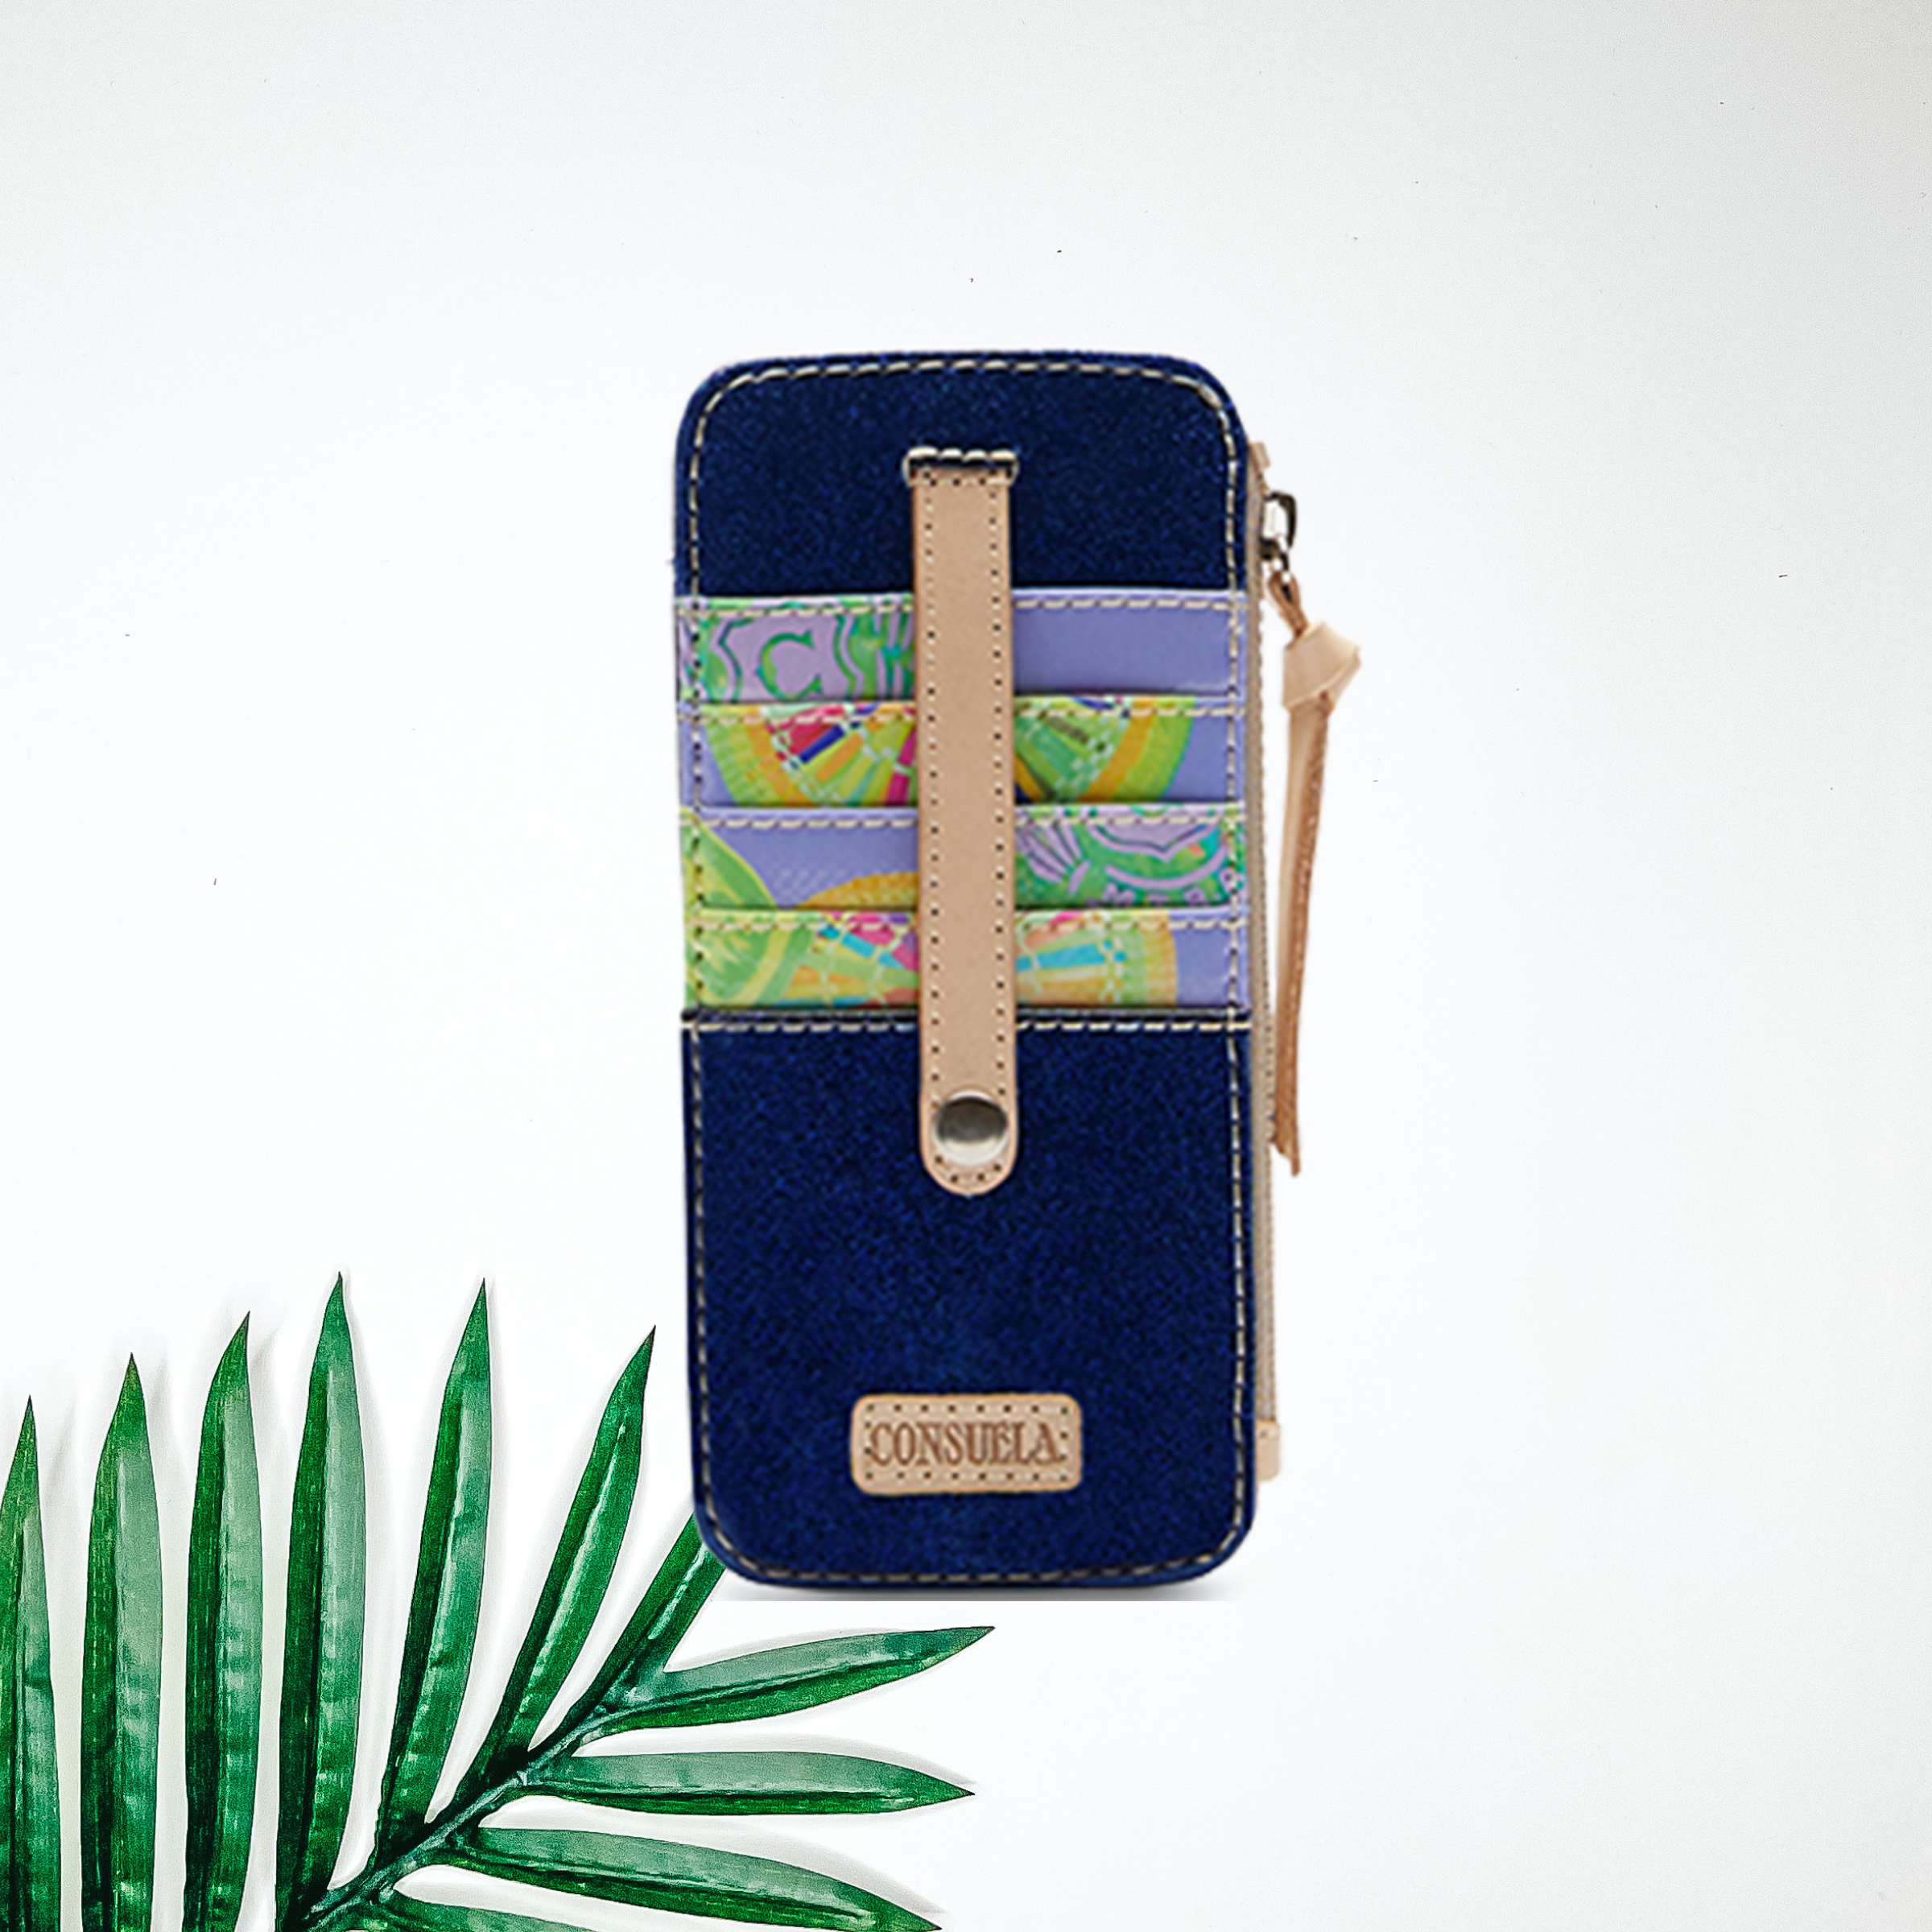 A blue glitter card organizer wallet with leather detailing. Pictured on white background with a palm leaf.